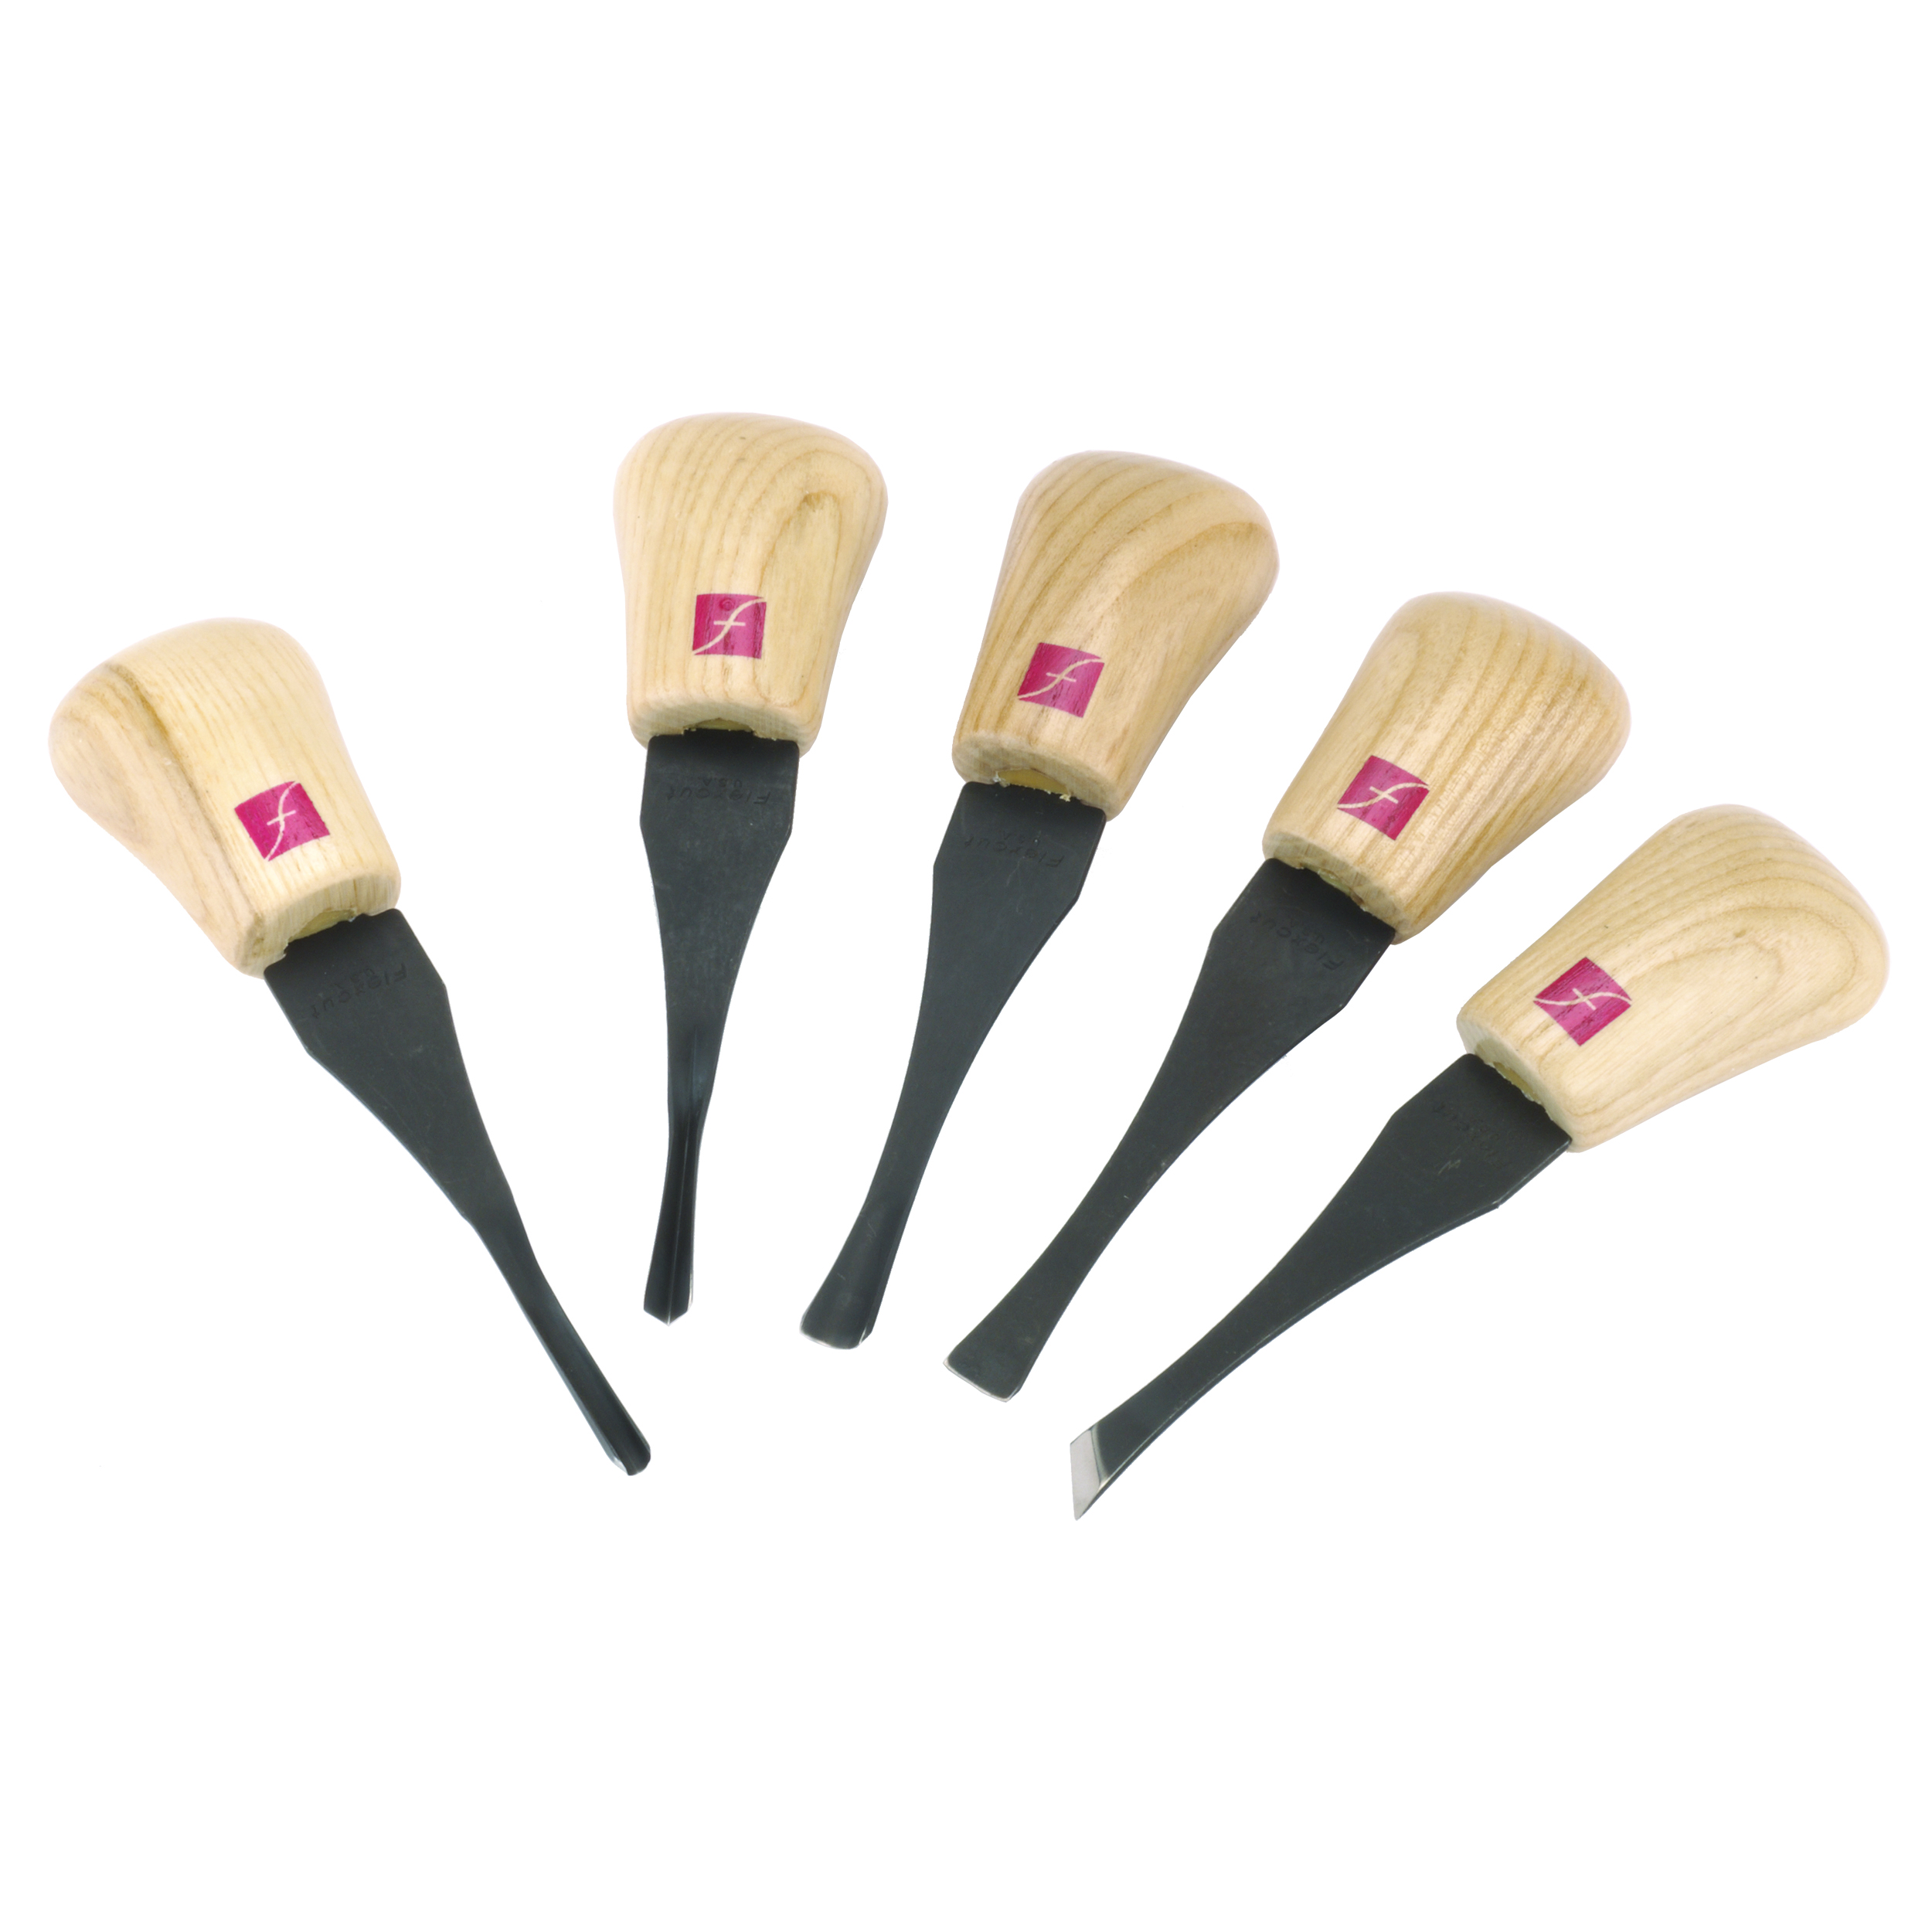 Beginners Palm Handled Carving Tool Set, 5 Piece